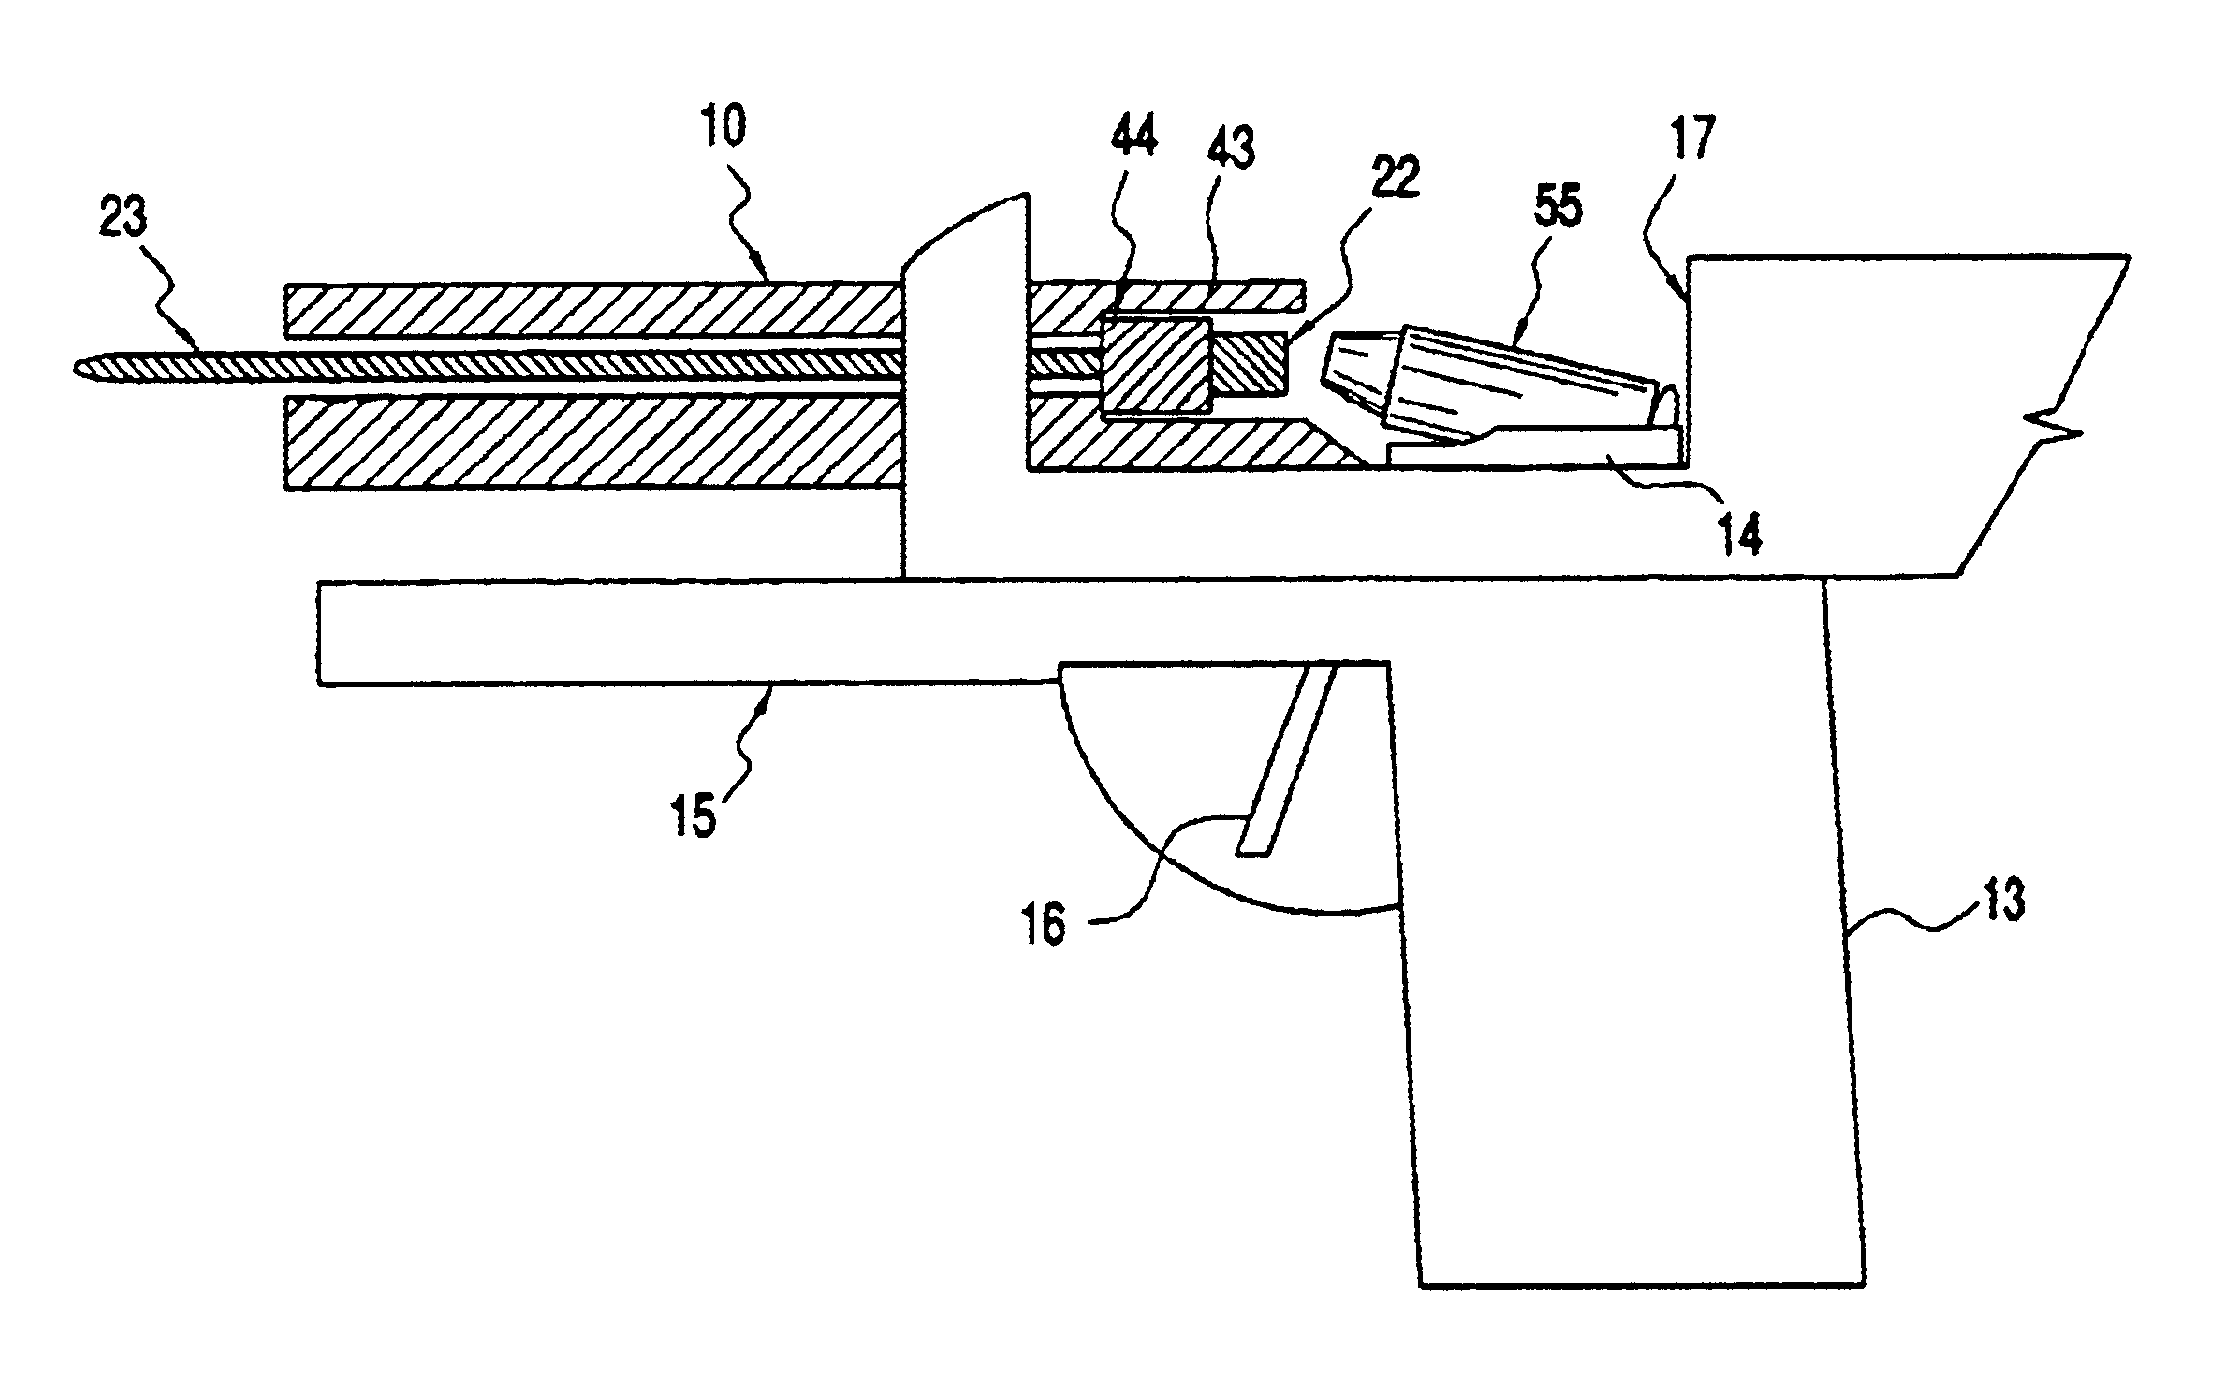 Device for rendering a firearm safe for dry fire practice